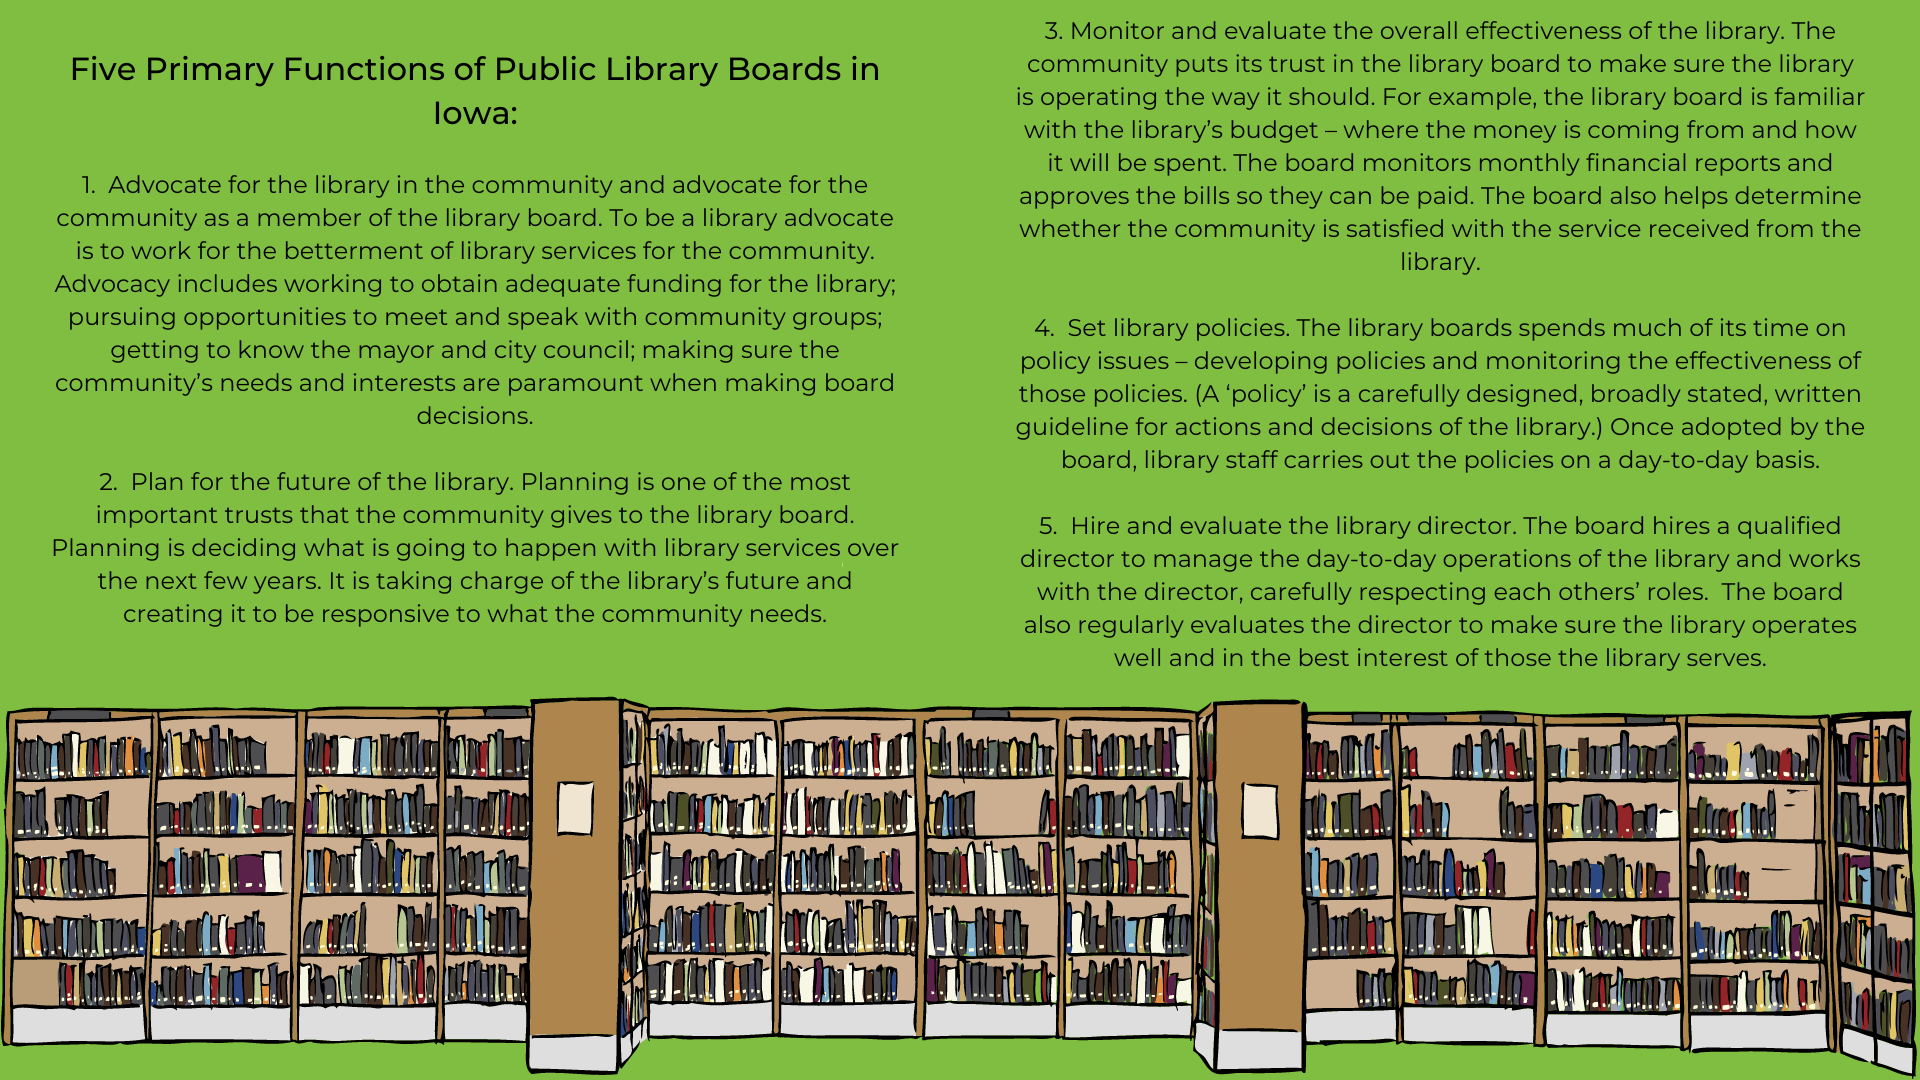 Five Primary Functions of Public Library Boards in Iowa 4. Set library policies. The library boards spends much of its time on policy issues – developing policies and monitoring the effectiveness of those policies-6.png